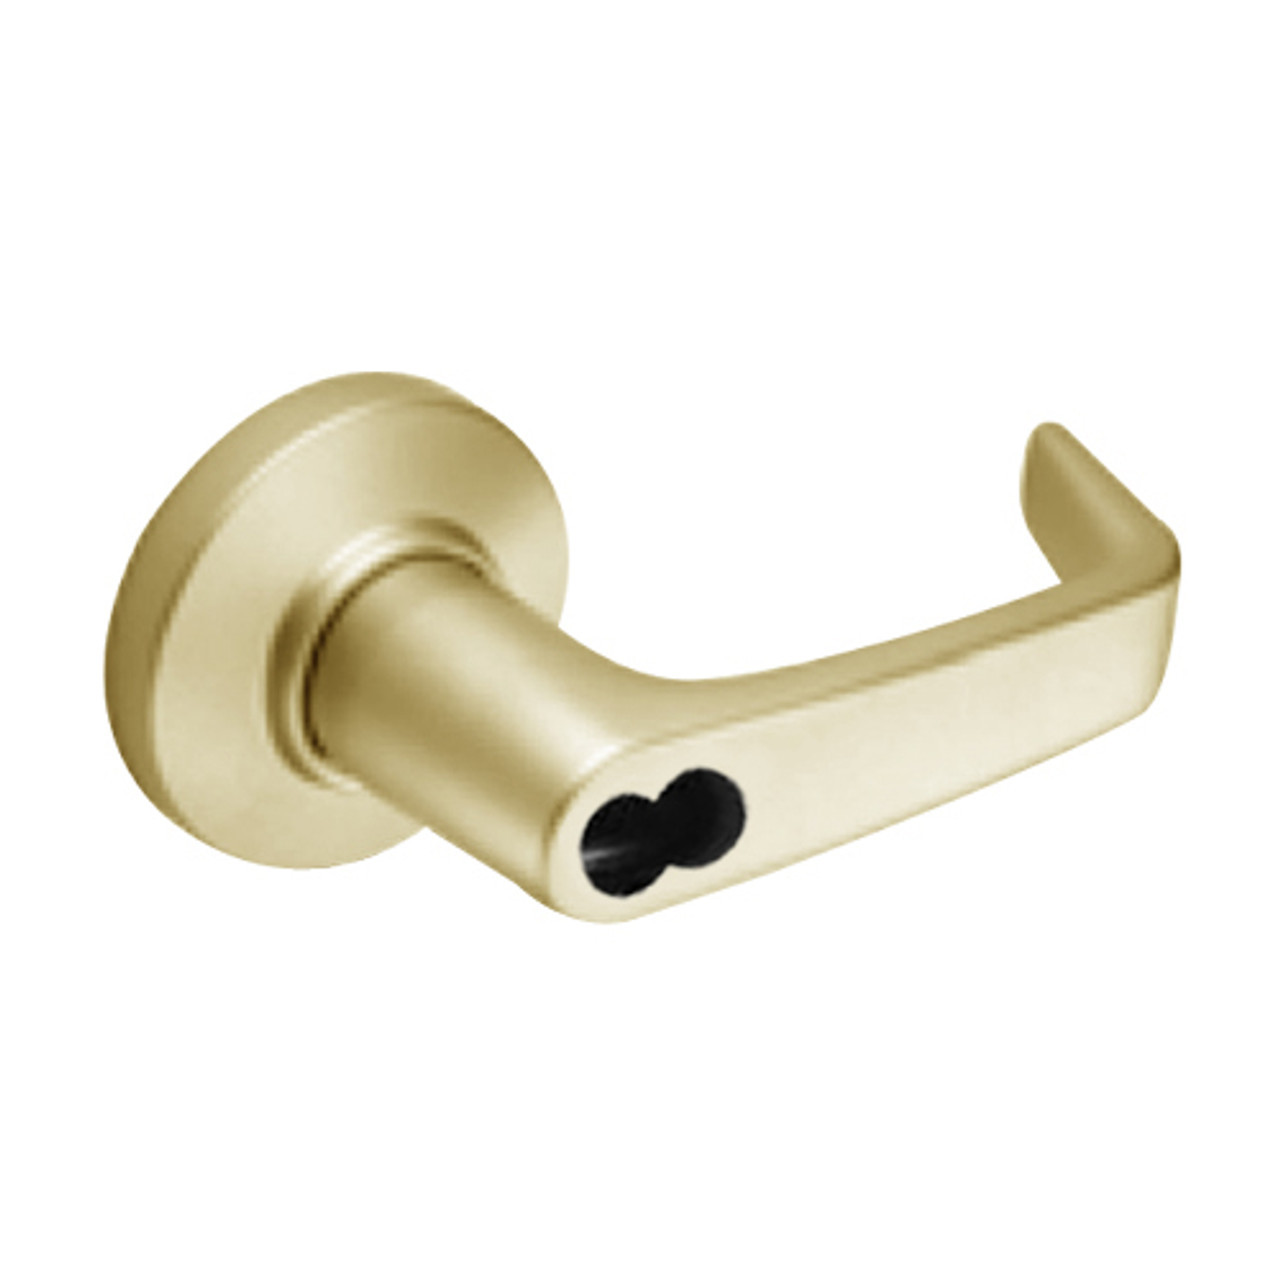 9K37A15CS3606LM Best 9K Series Dormitory or Storeroom Cylindrical Lever Locks with Contour Angle with Return Lever Design Accept 7 Pin Best Core in Satin Brass